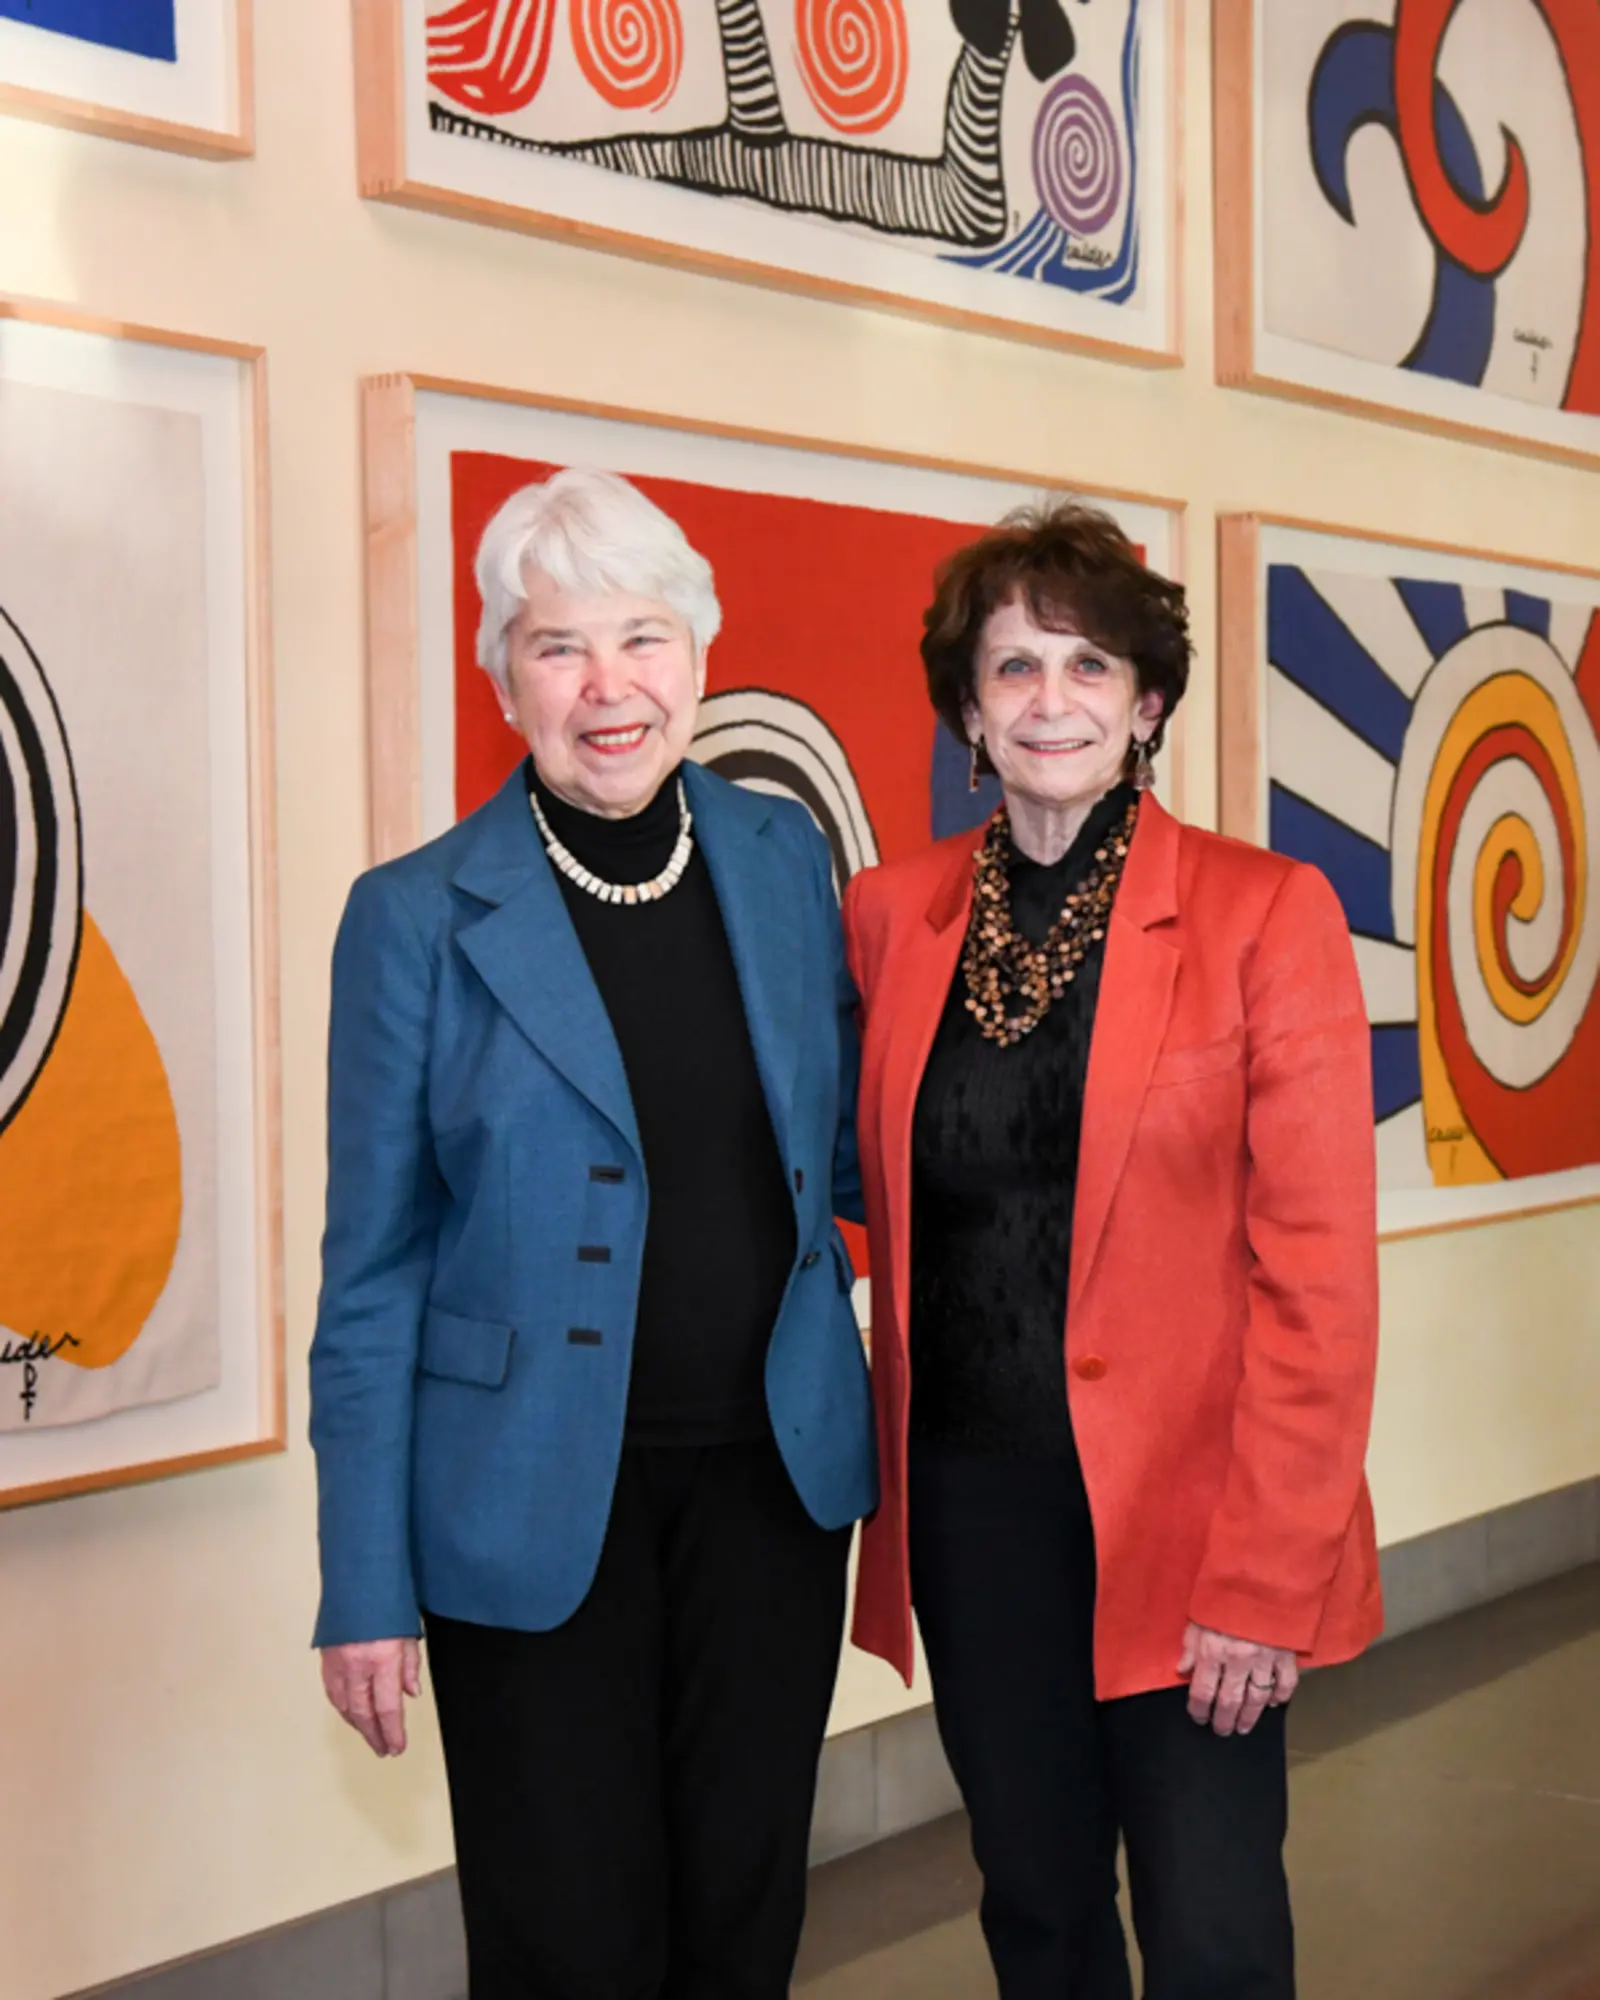 Two people stand together in front of a wall of art in primary colors.